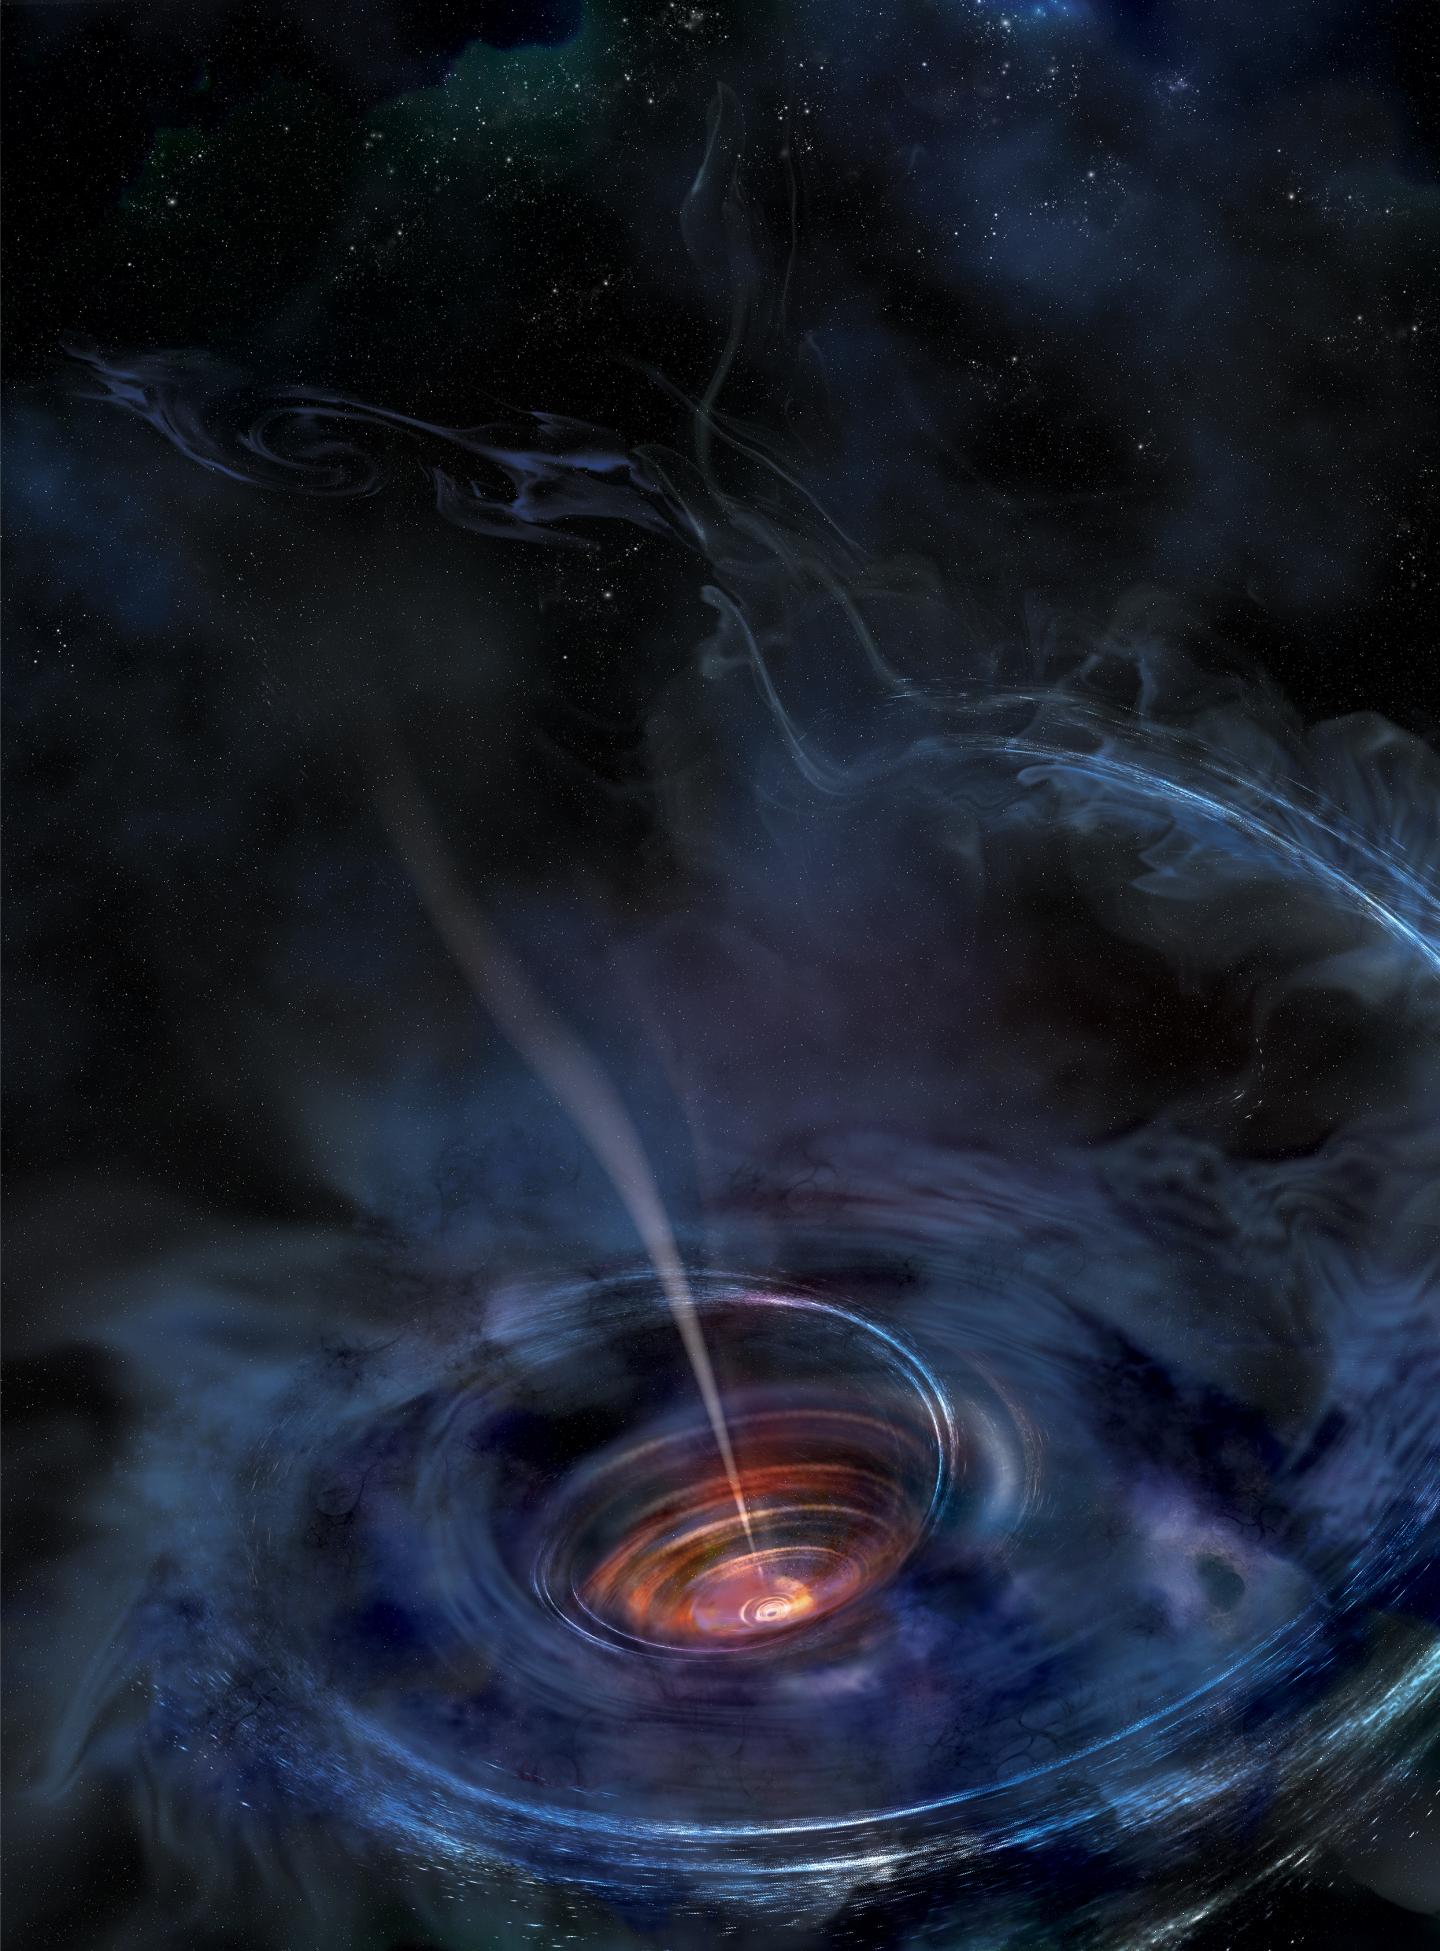 Sleeping Giant Black Hole Awoken By Doomed Star | Space